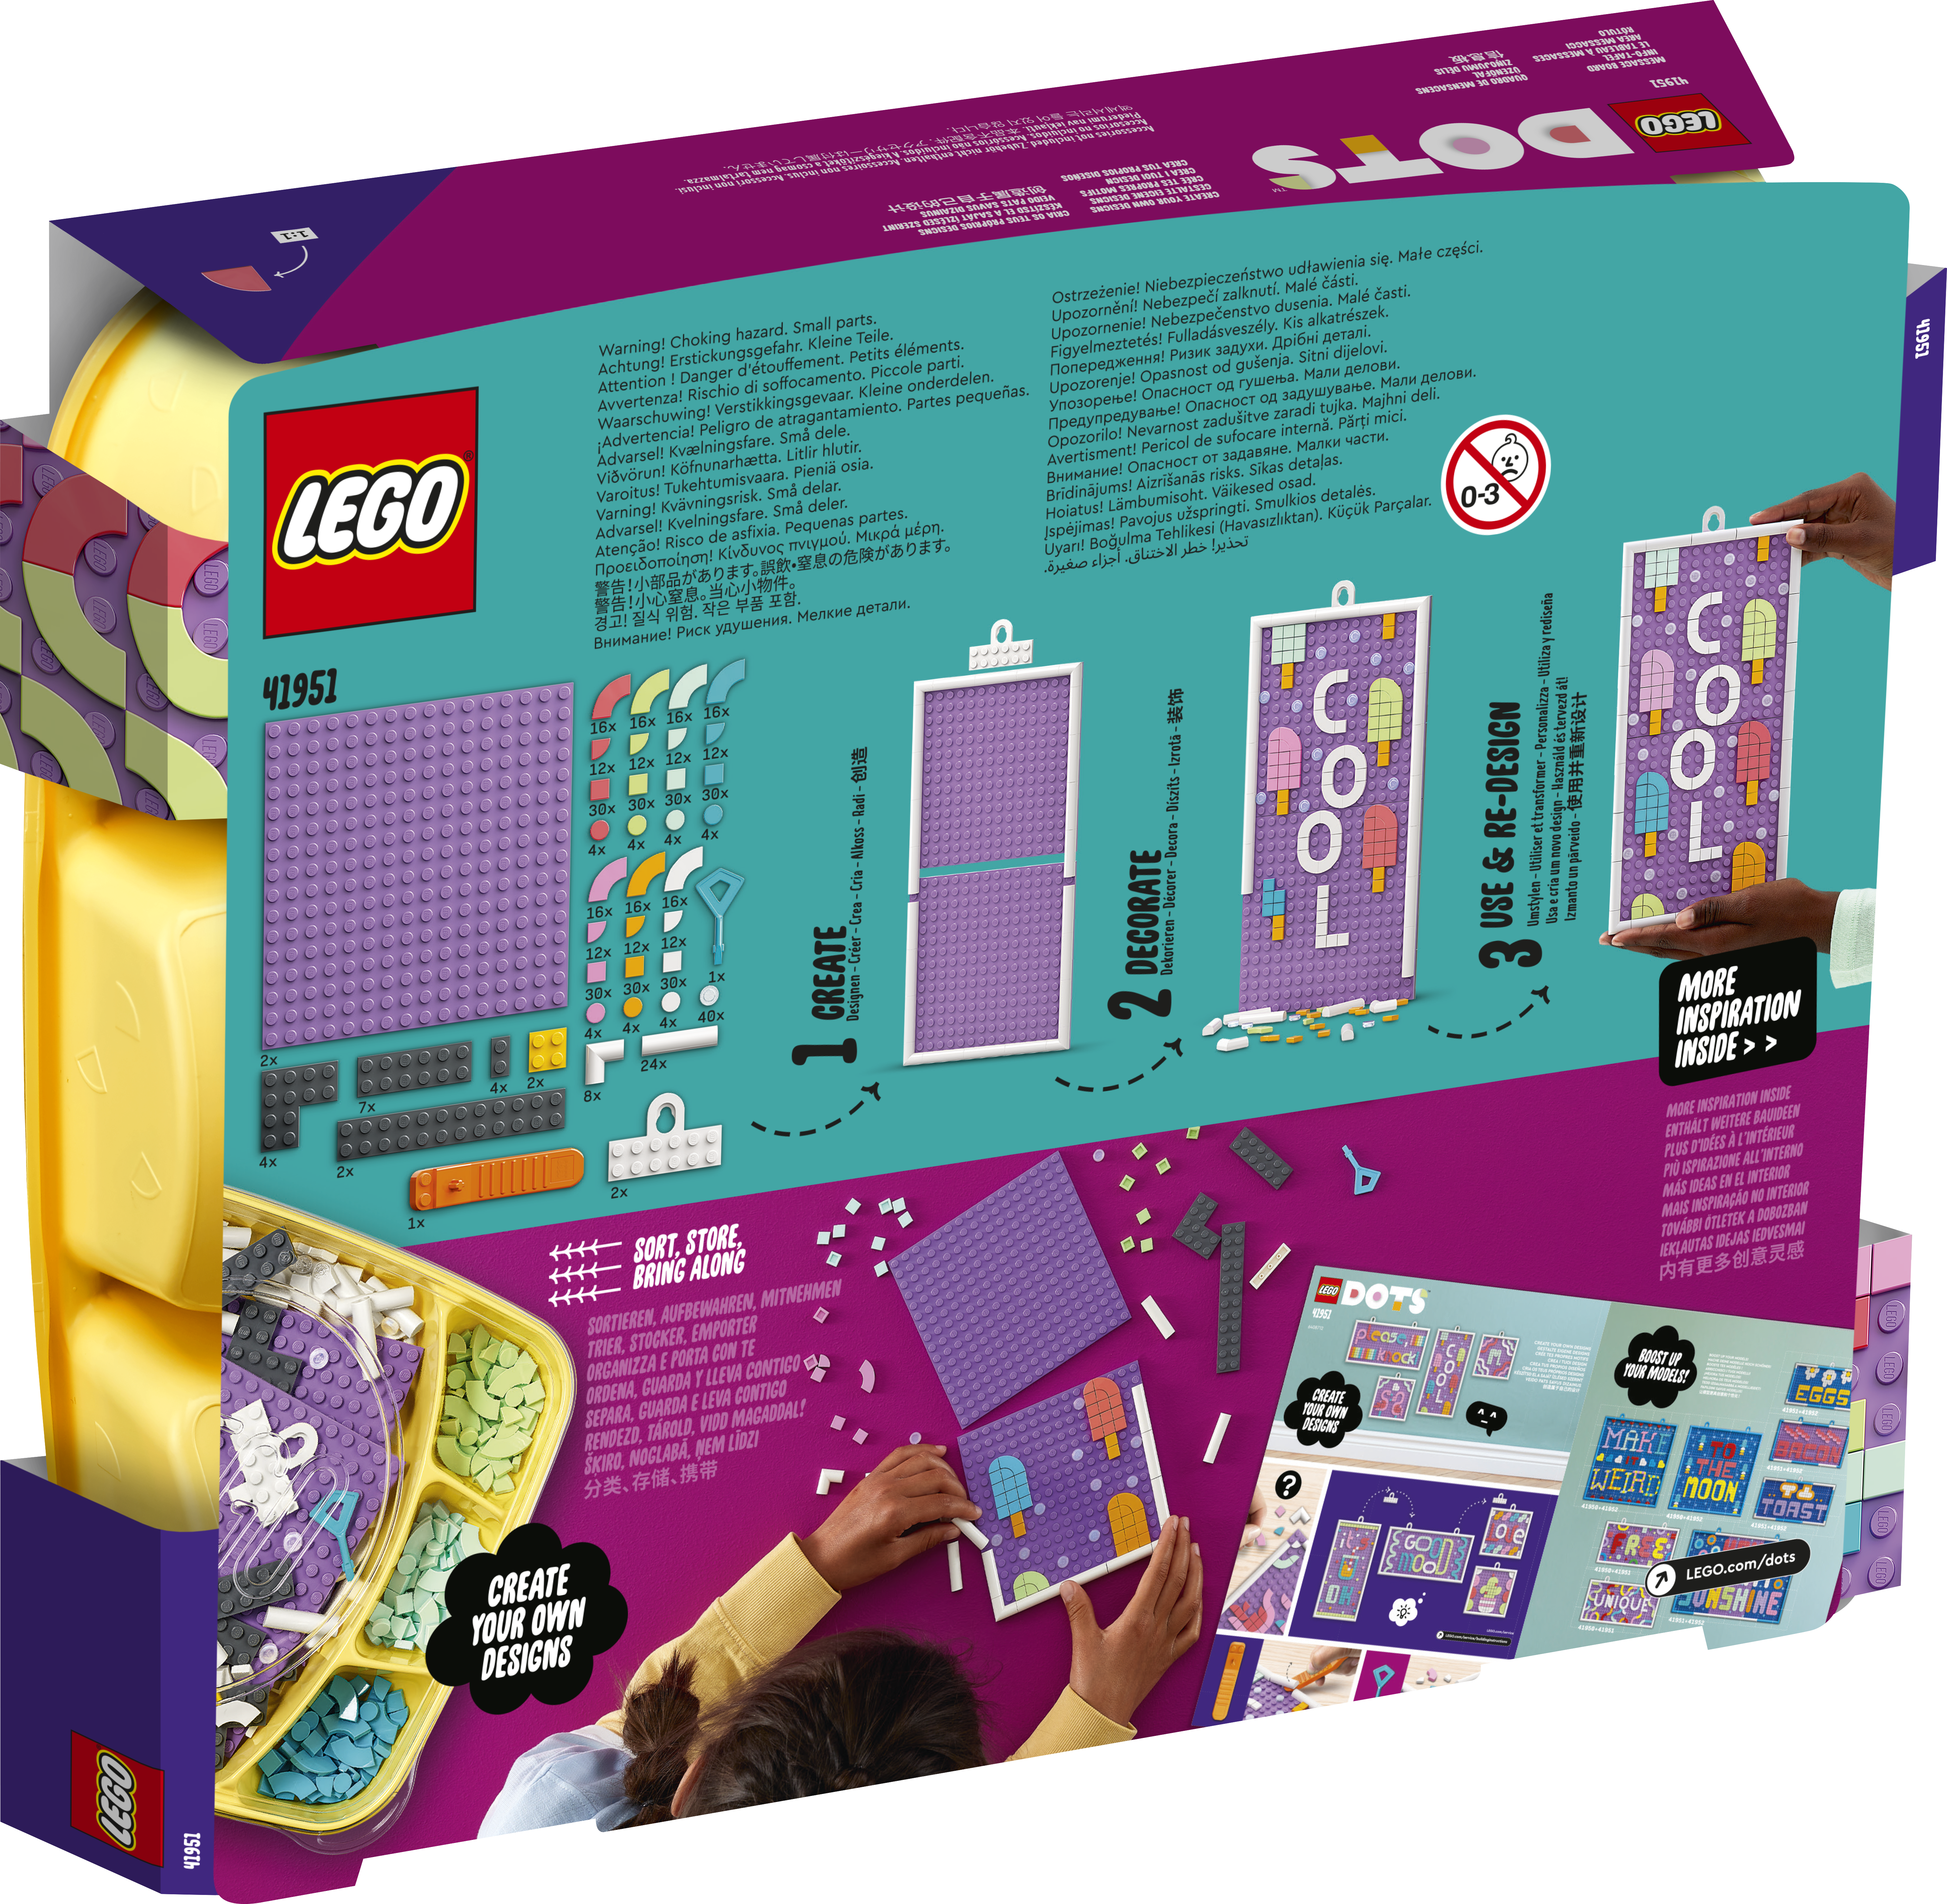 LEGO® DOTS™ 41951 Message Board